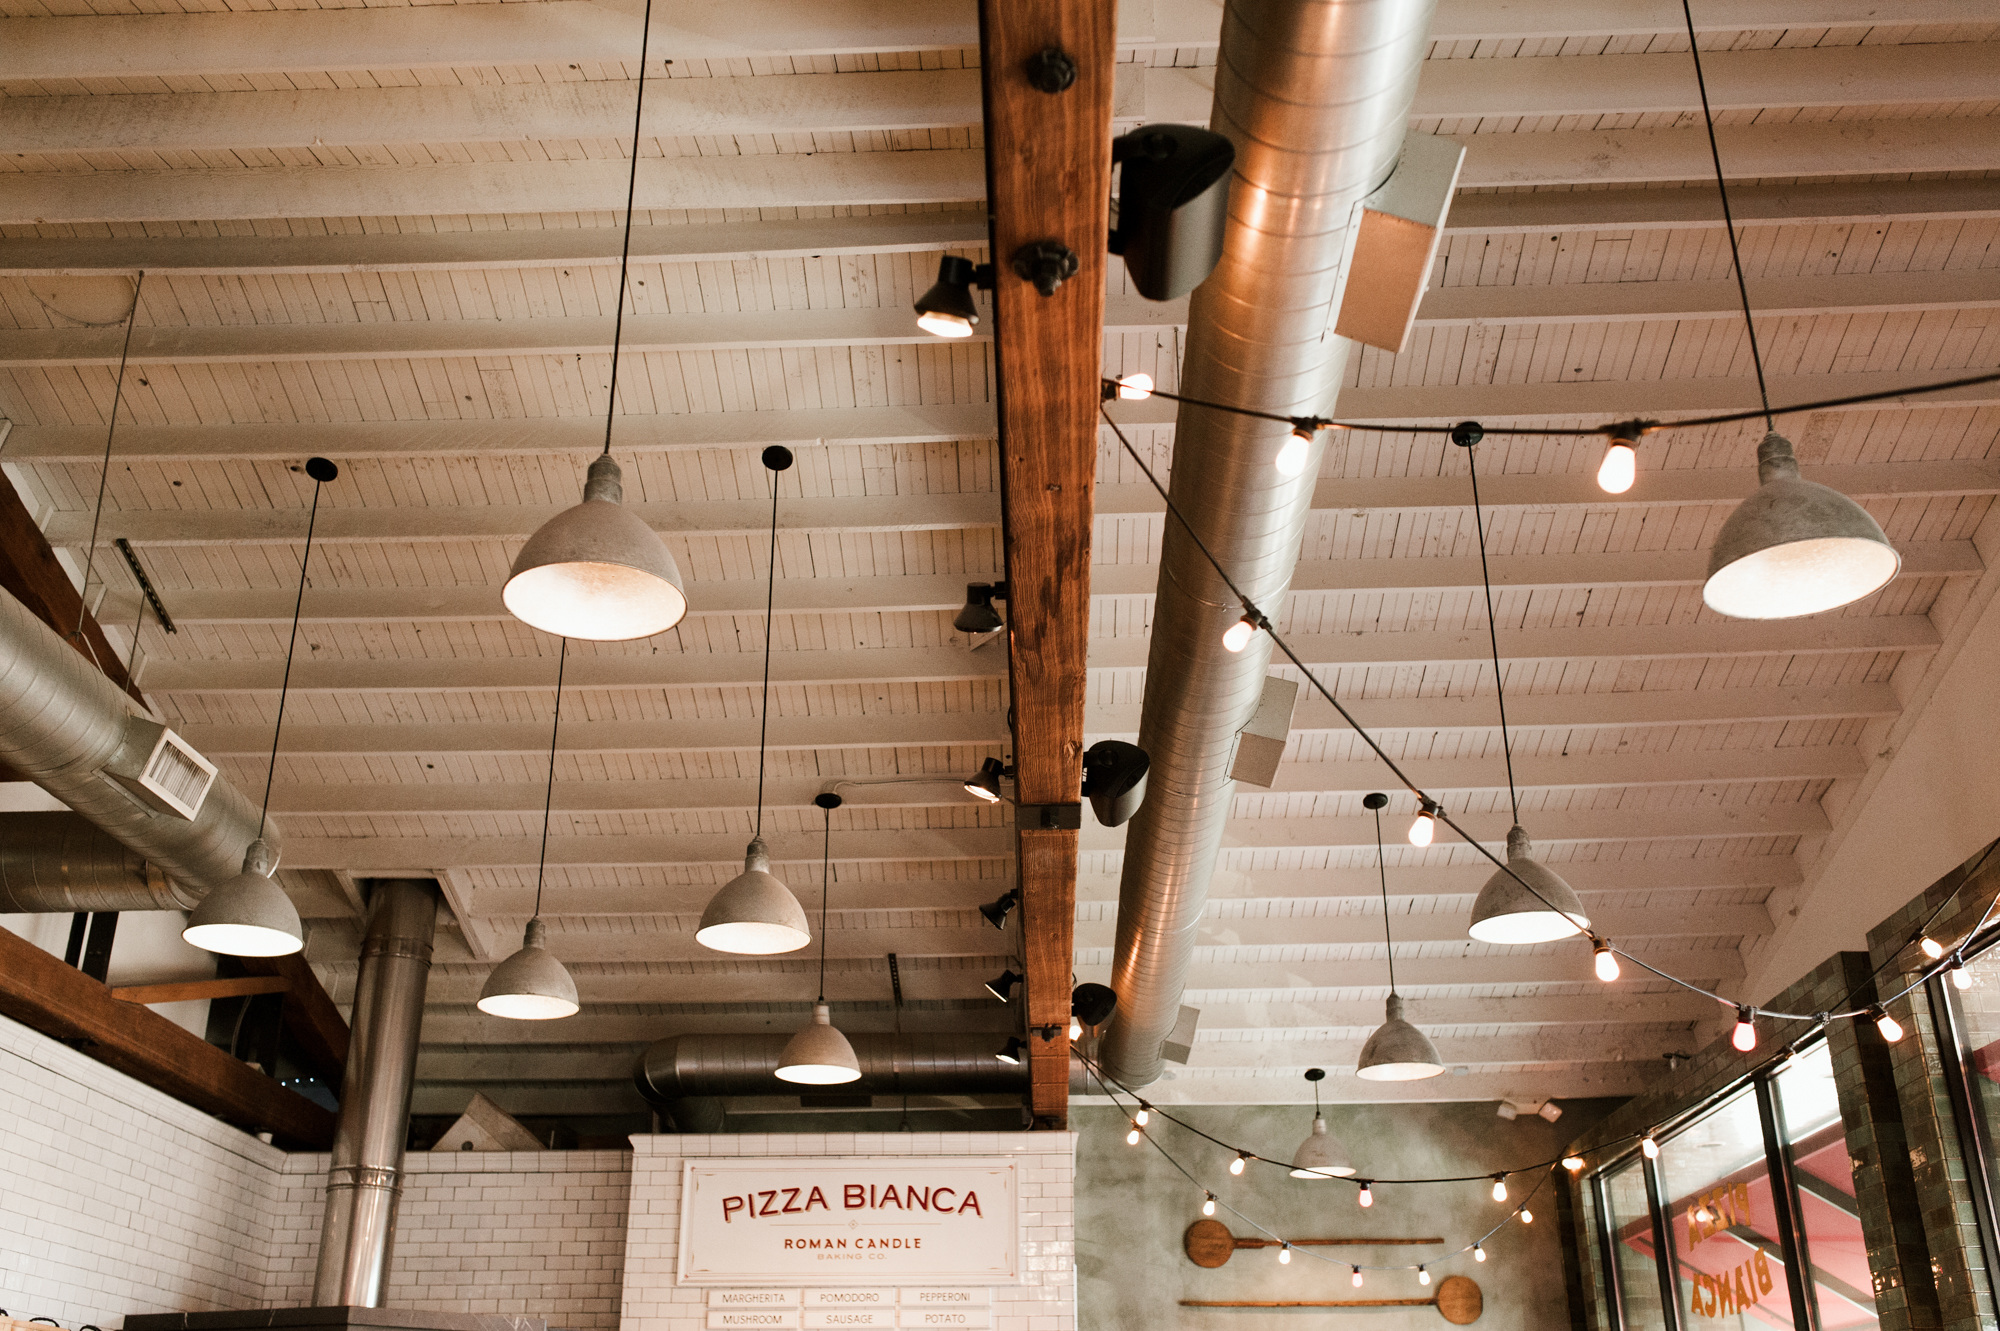 Ceiling details at Roman Candle Baking Co. By wedding photographer Briana Morrison